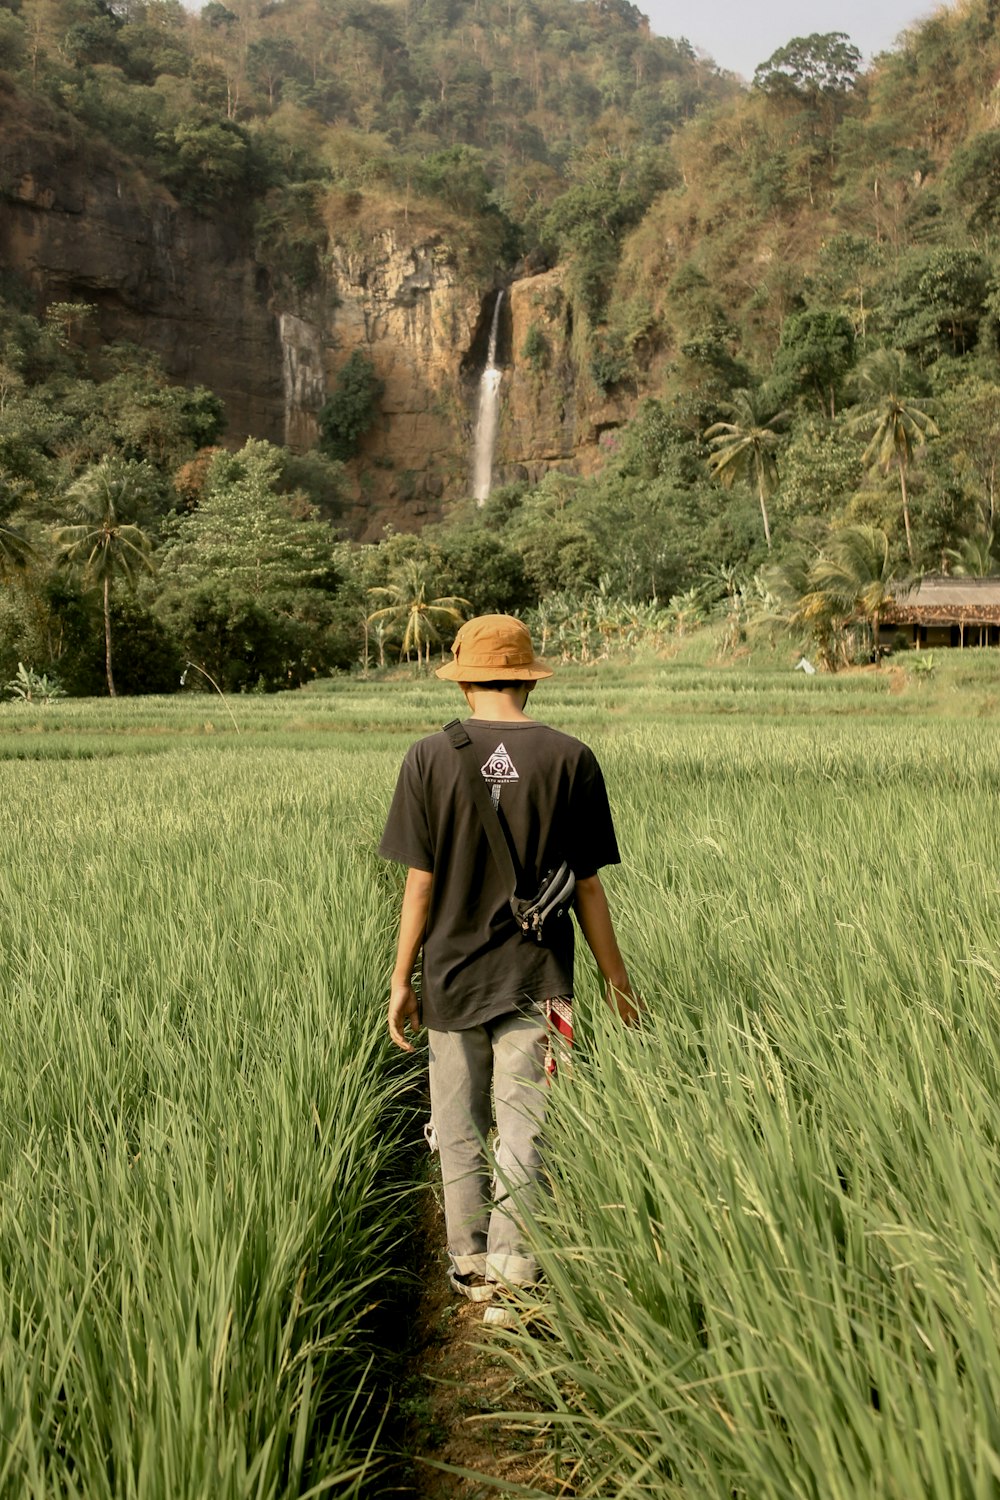 a man standing in a grassy field with a waterfall in the background